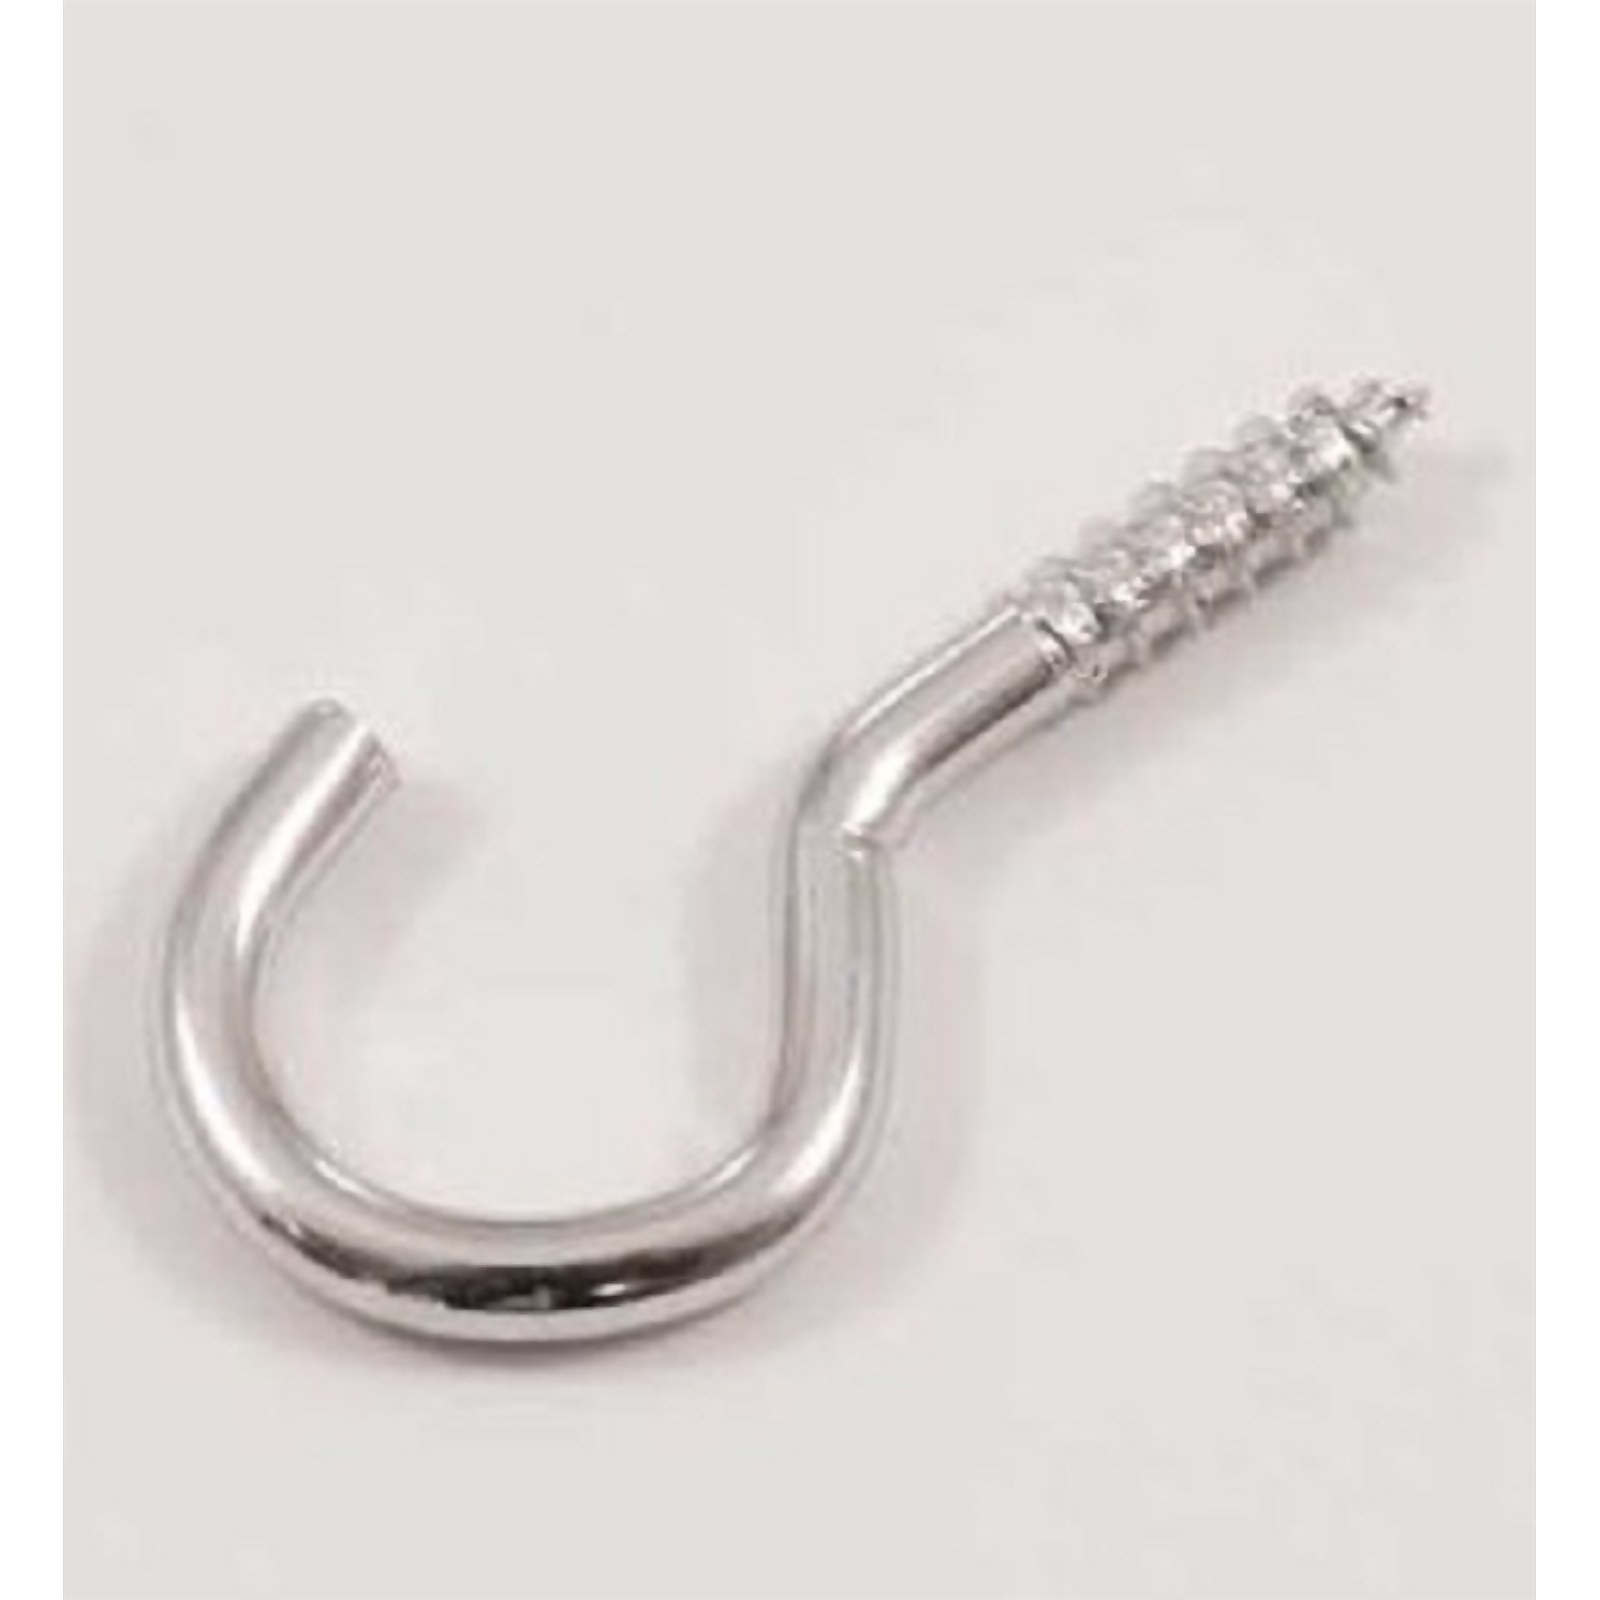 Photo of Screw Hook - Zinc Plated - 8 Pack